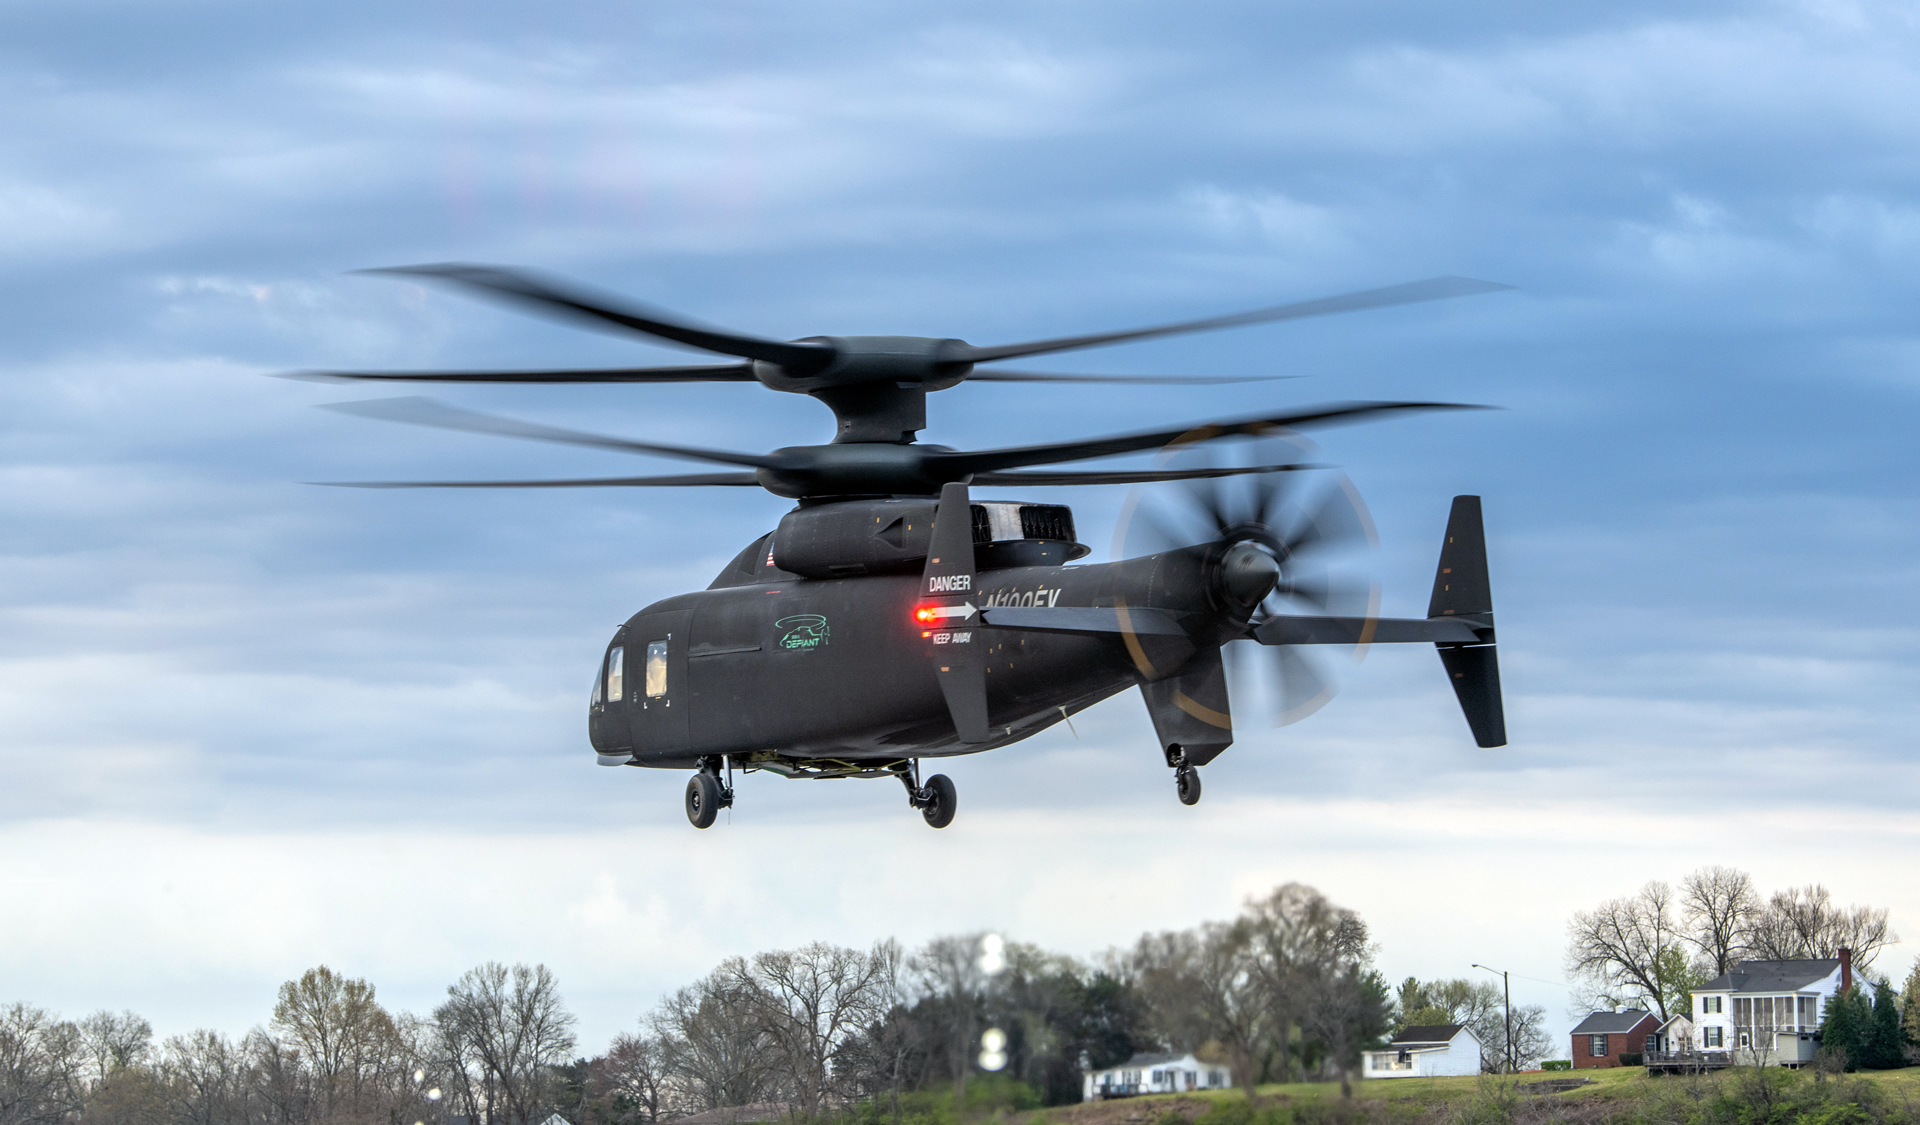 The Lockheed Martin Sikorsky-Boeing SB>1 DEFIANT® helicopter flew 700 nautical miles from West Palm Beach, Florida to Nashville to give U.S. Army Aviators a first-hand look at this impressive aircraft. Photo courtesy Lockheed Martin Sikorsky-Boeing. 